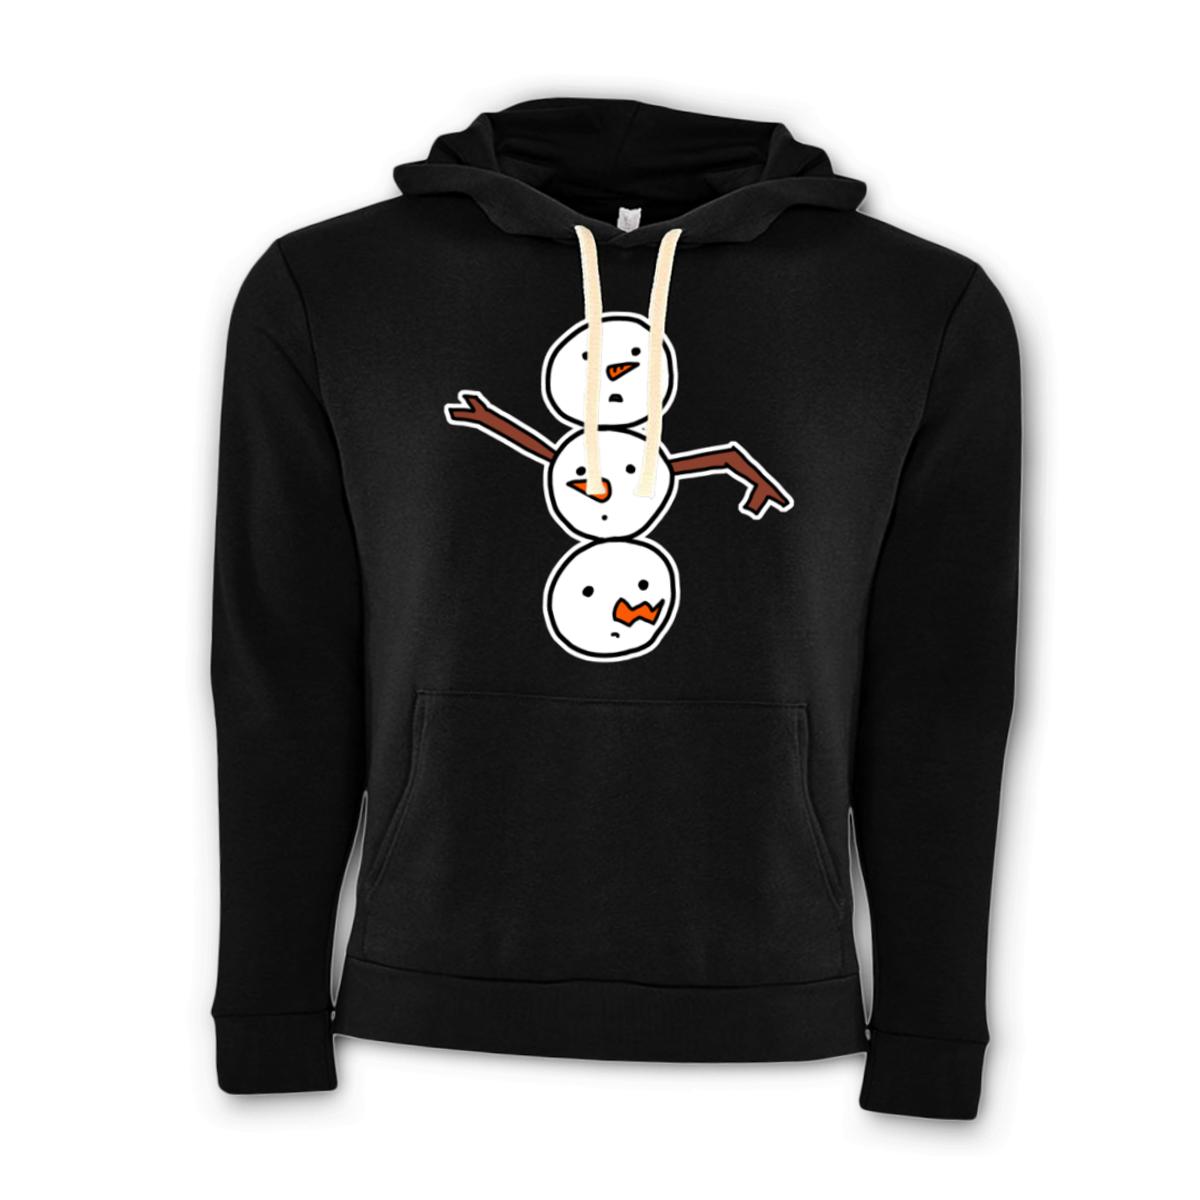 Snowman All Heads Unisex Pullover Hoodie Small black